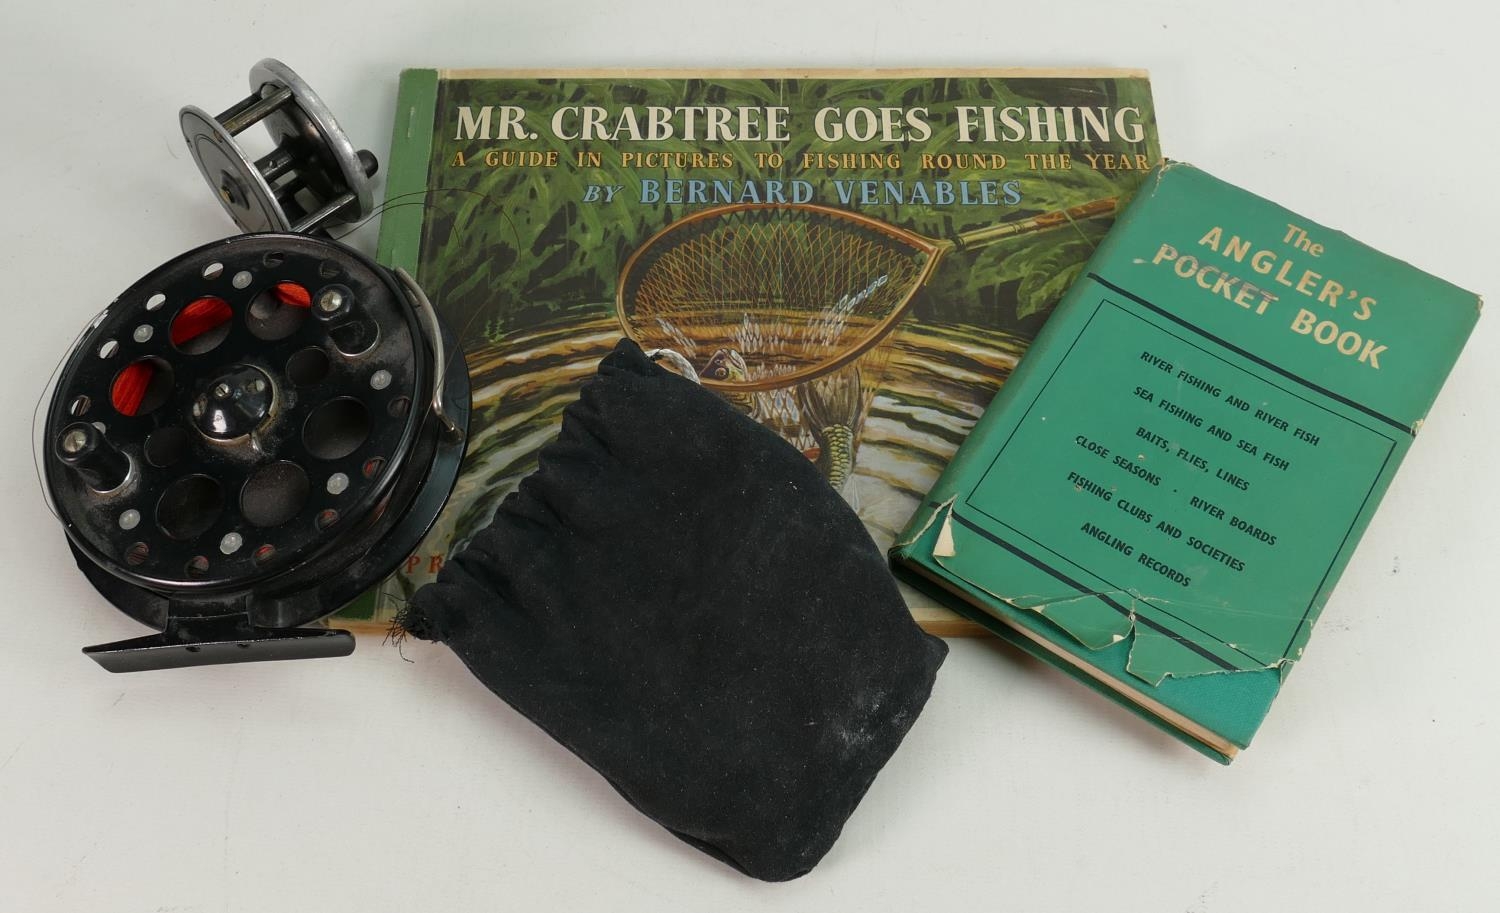 A collection of vintage fishing related items to include: Allcocks